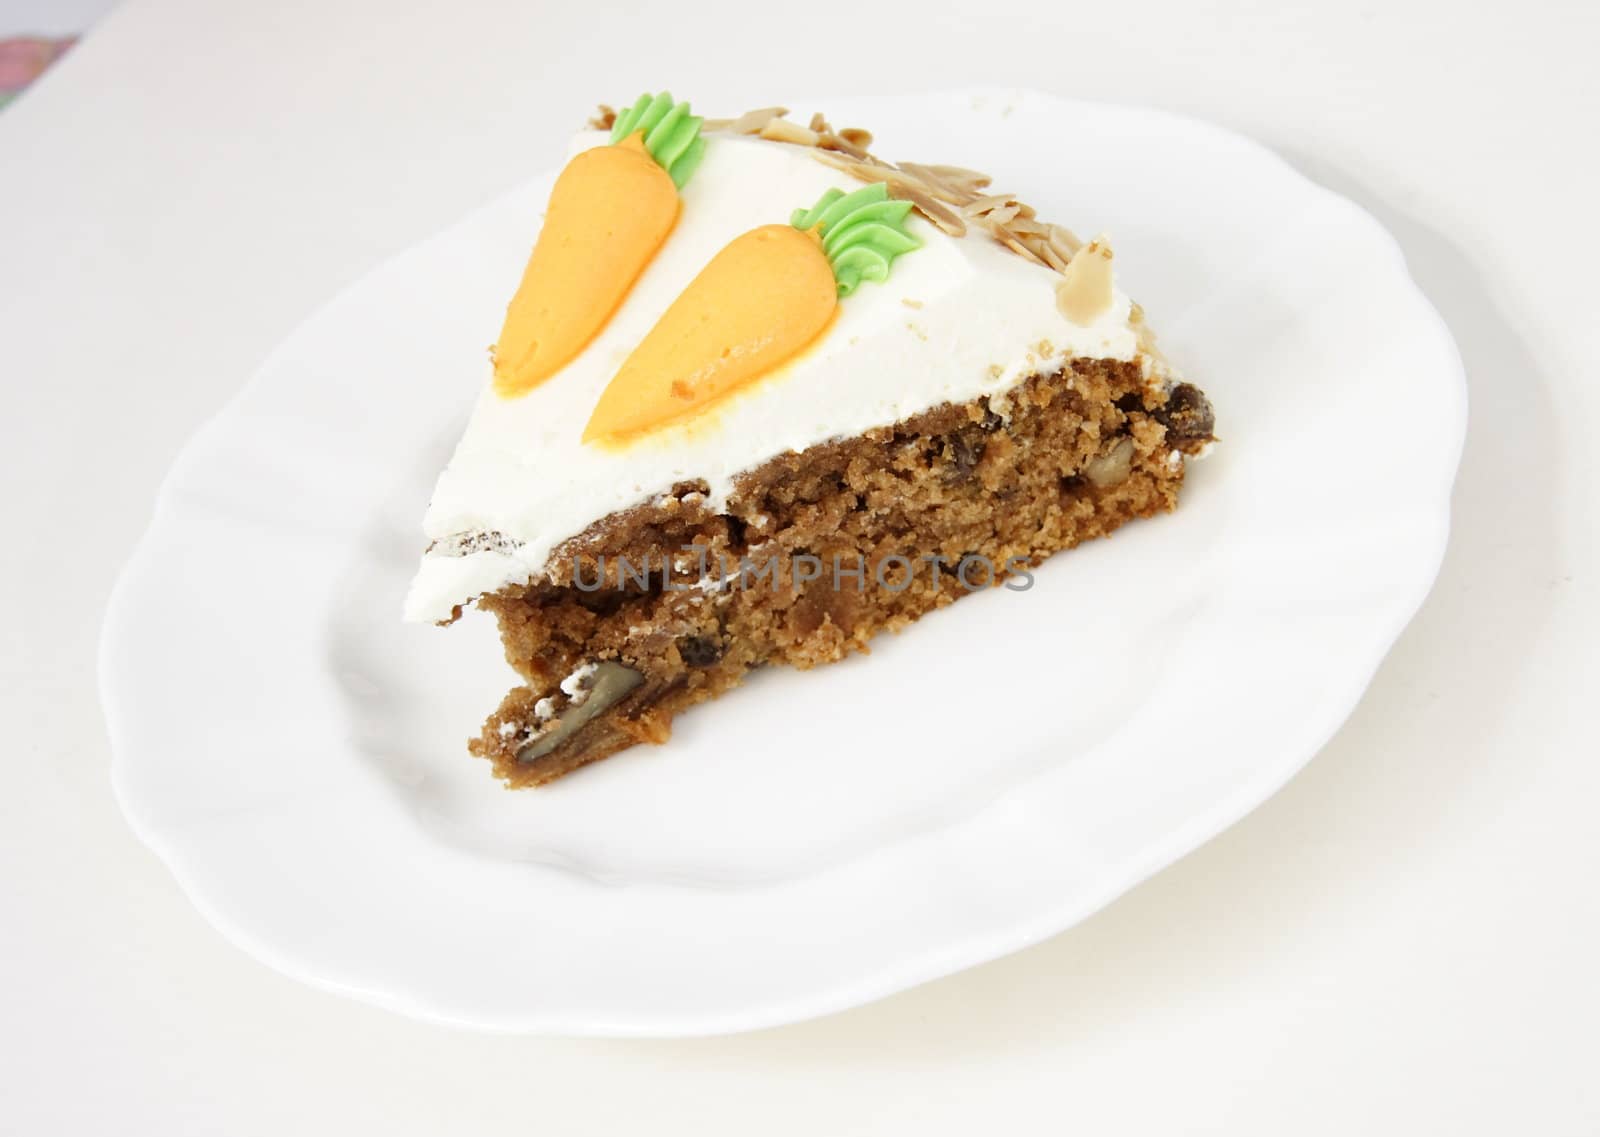 single serving of carrot cake on a white plate